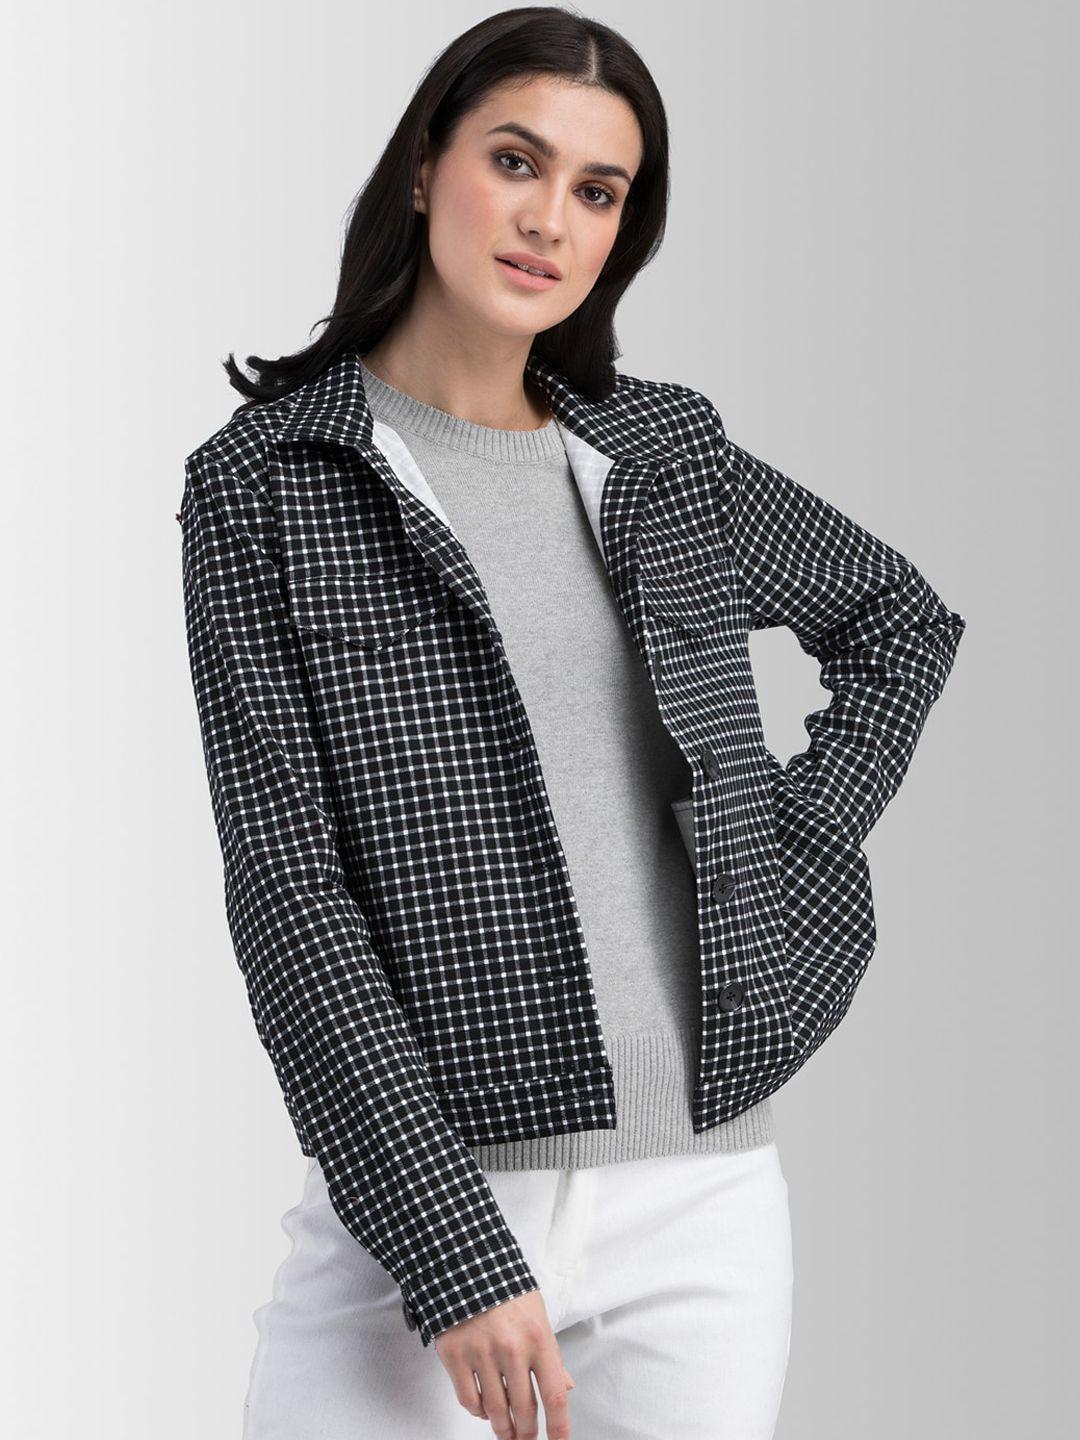 fablestreet women black checked tailored jacket